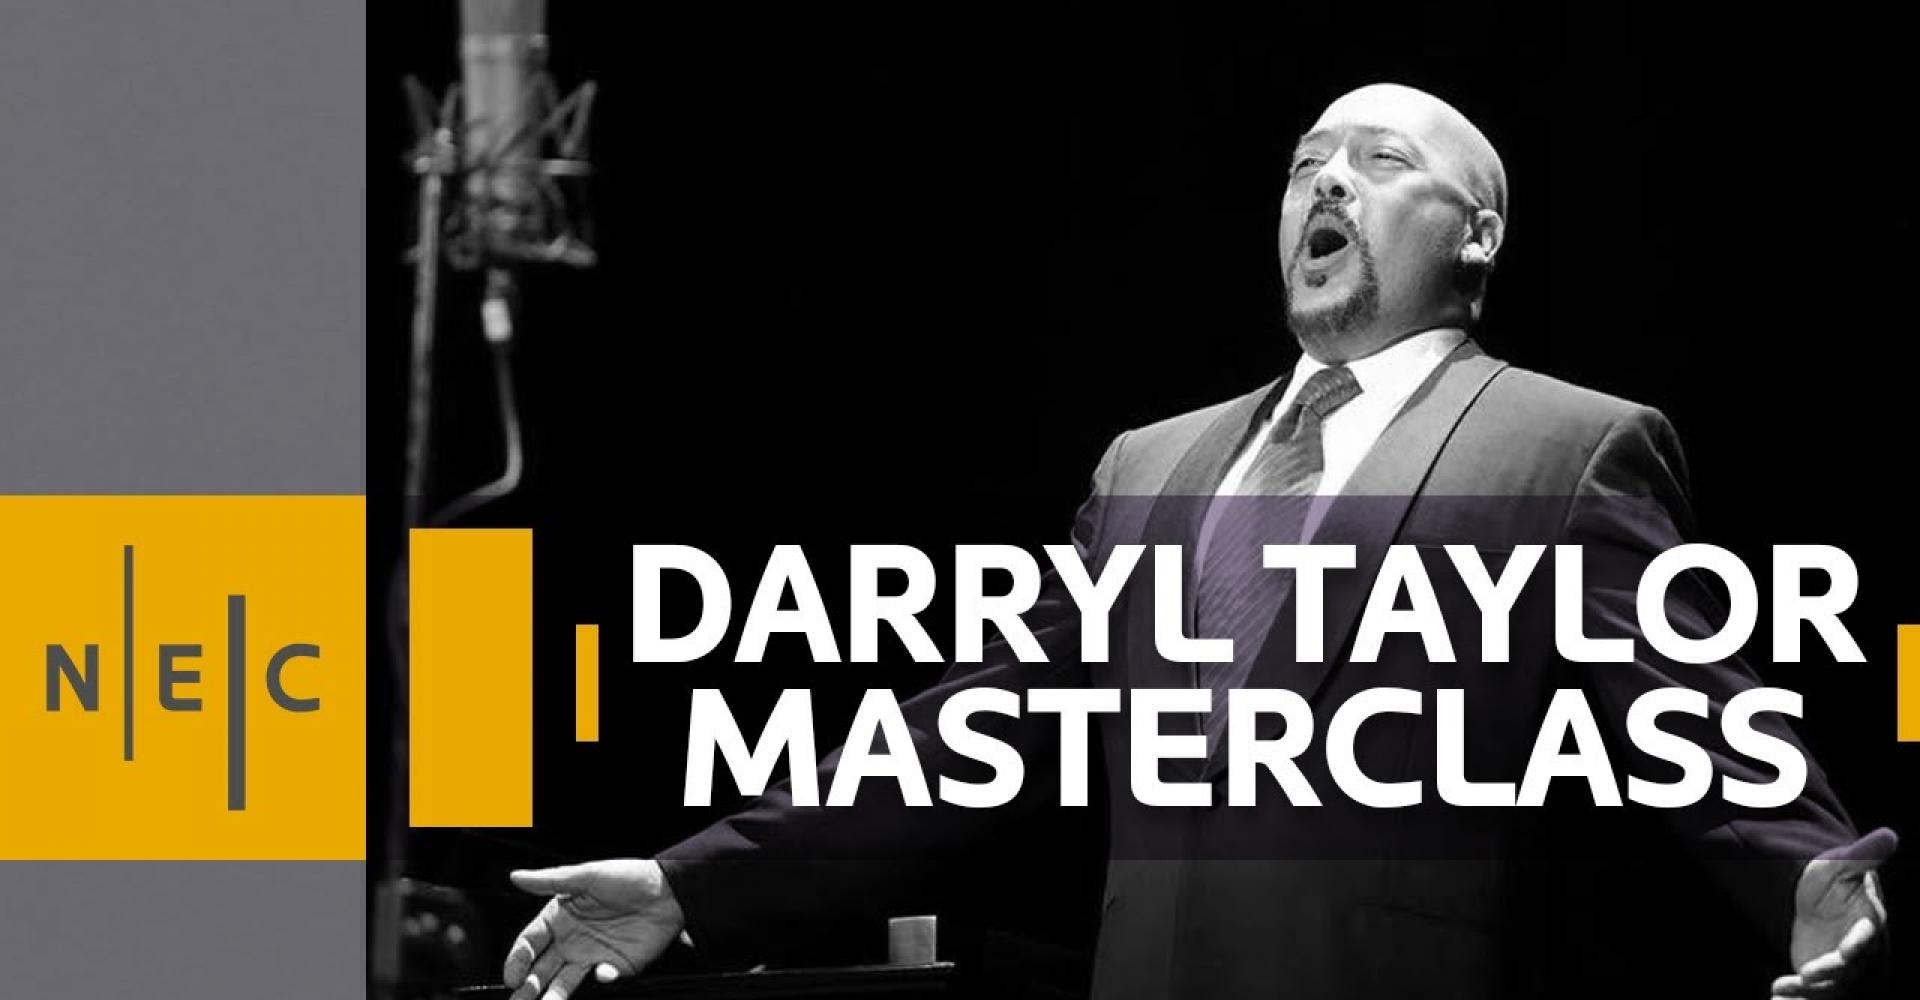 Text: "Darryl Taylor Masterclass" with a picture of Taylor smiling and singing